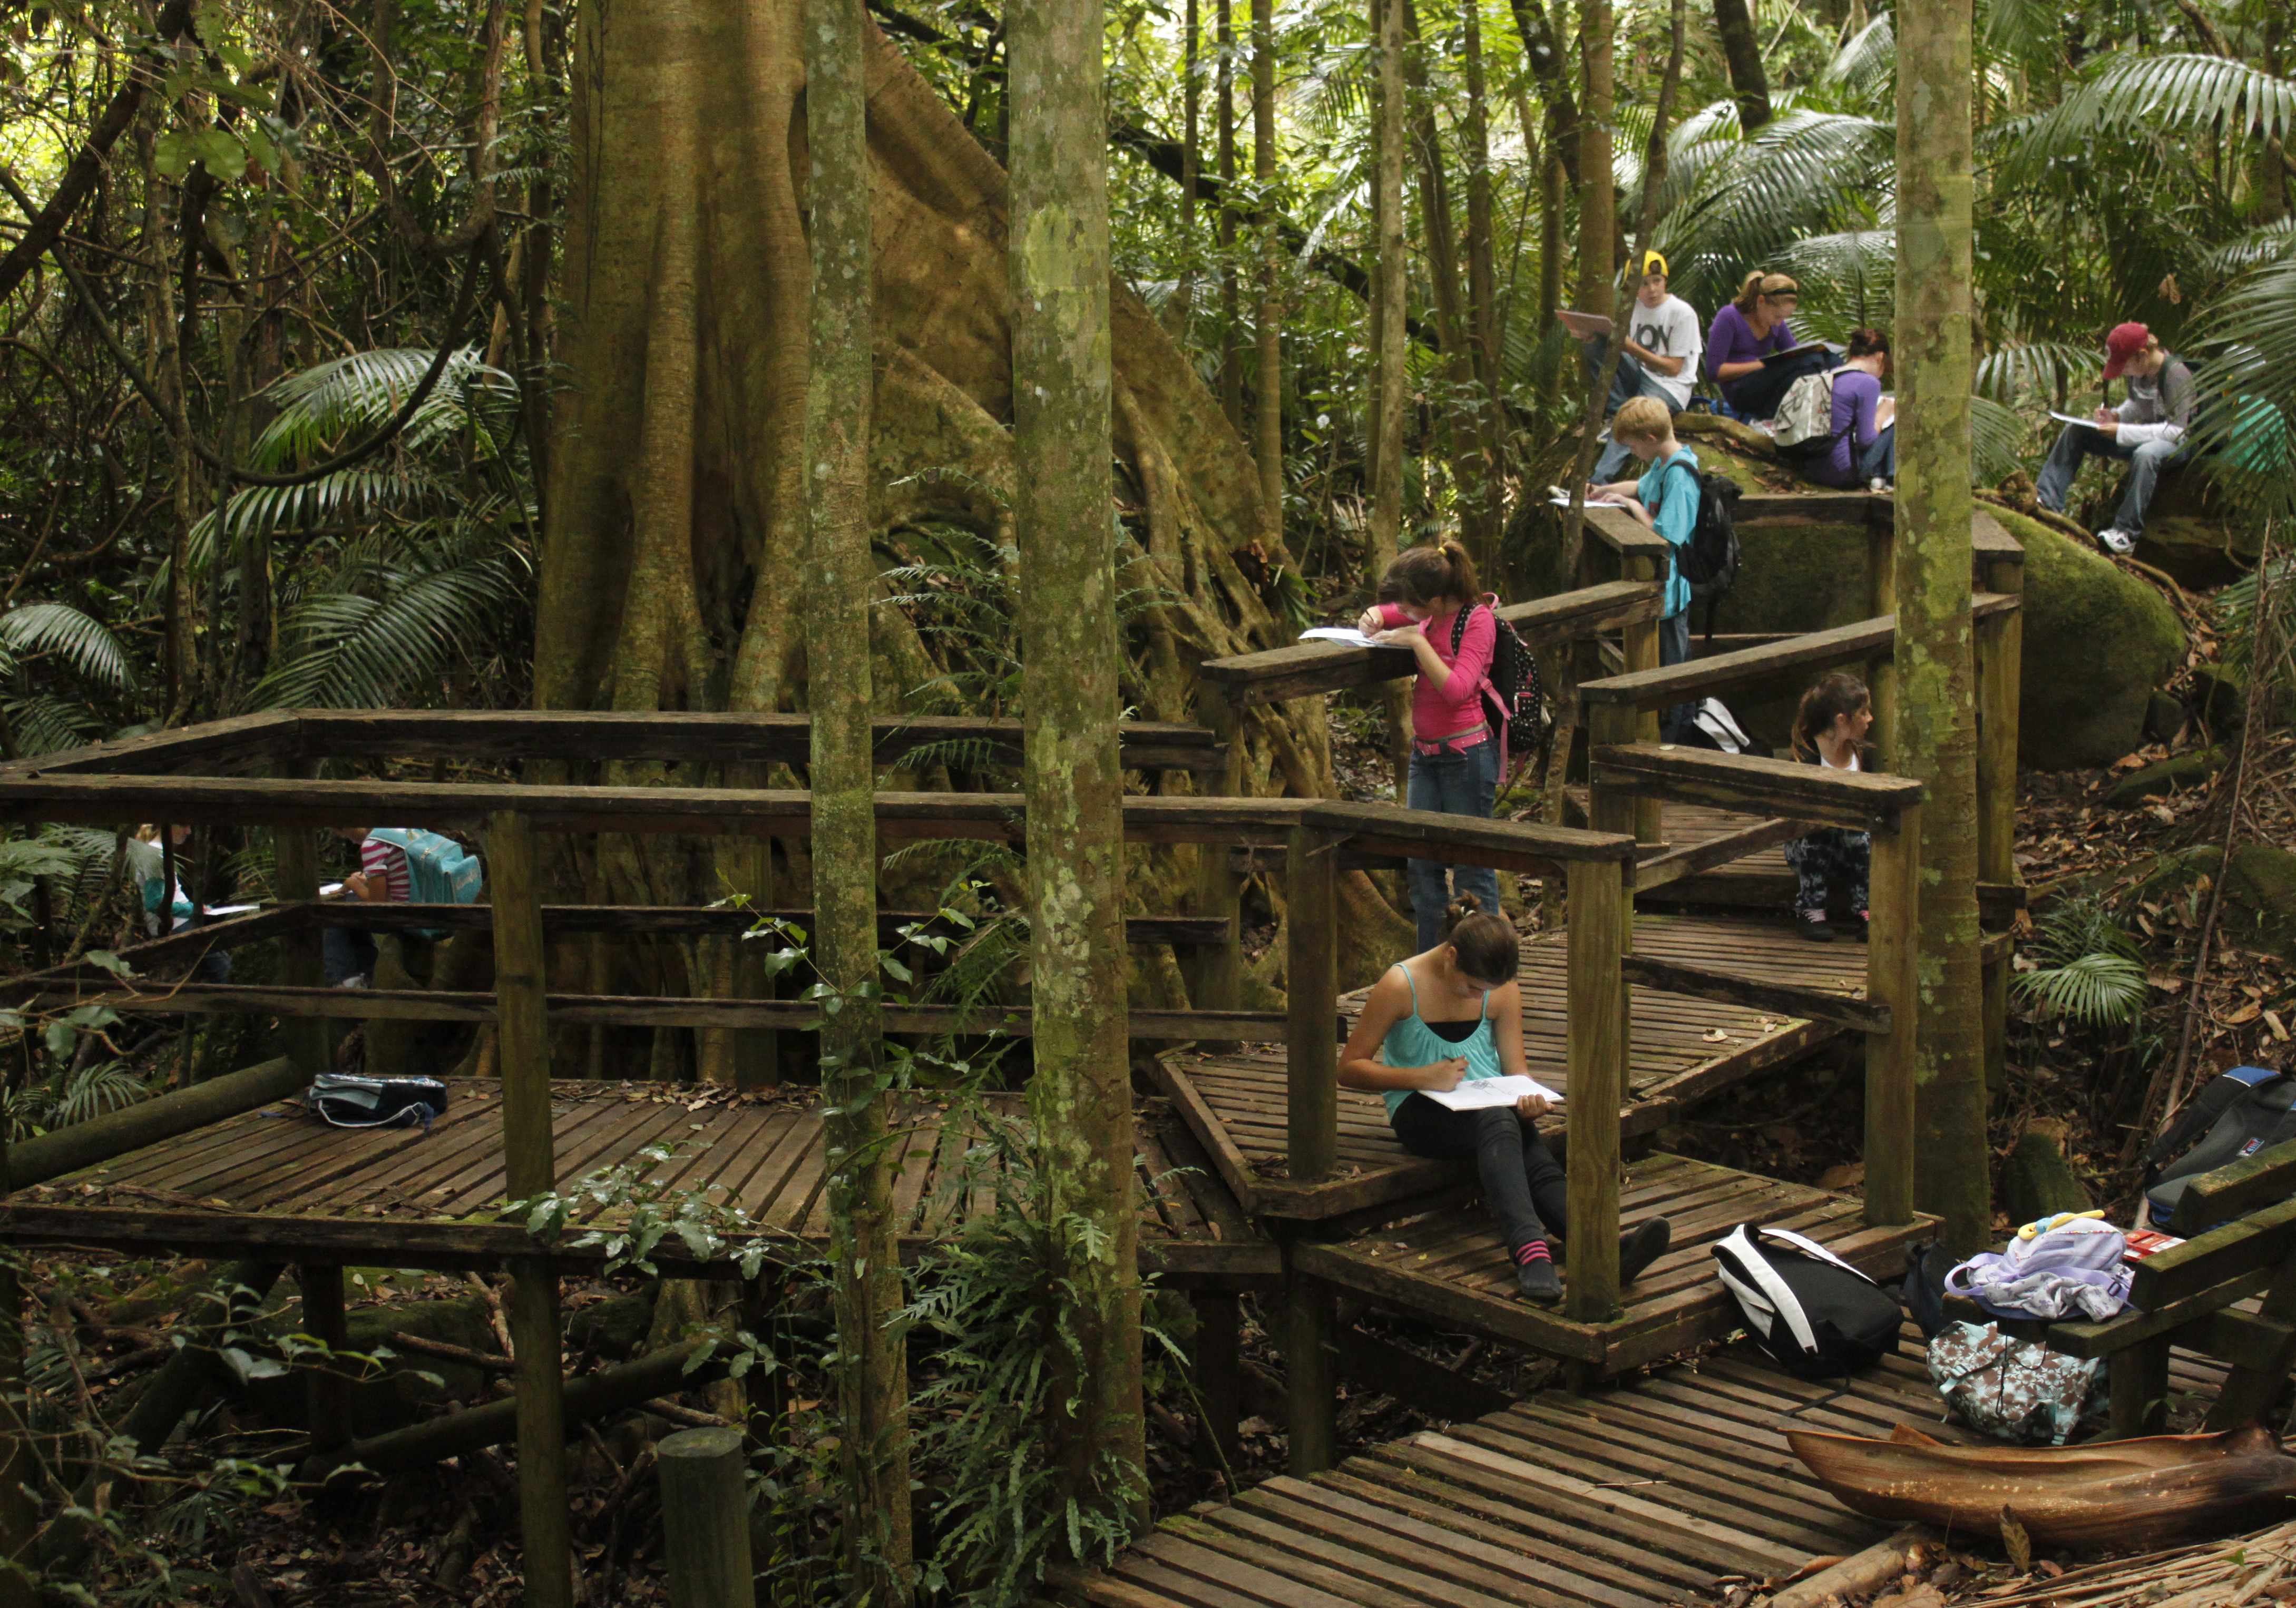 a group of school students sitting and standing on a wooden walkway through a rainforest, they are all writing notes and look involved in their work.